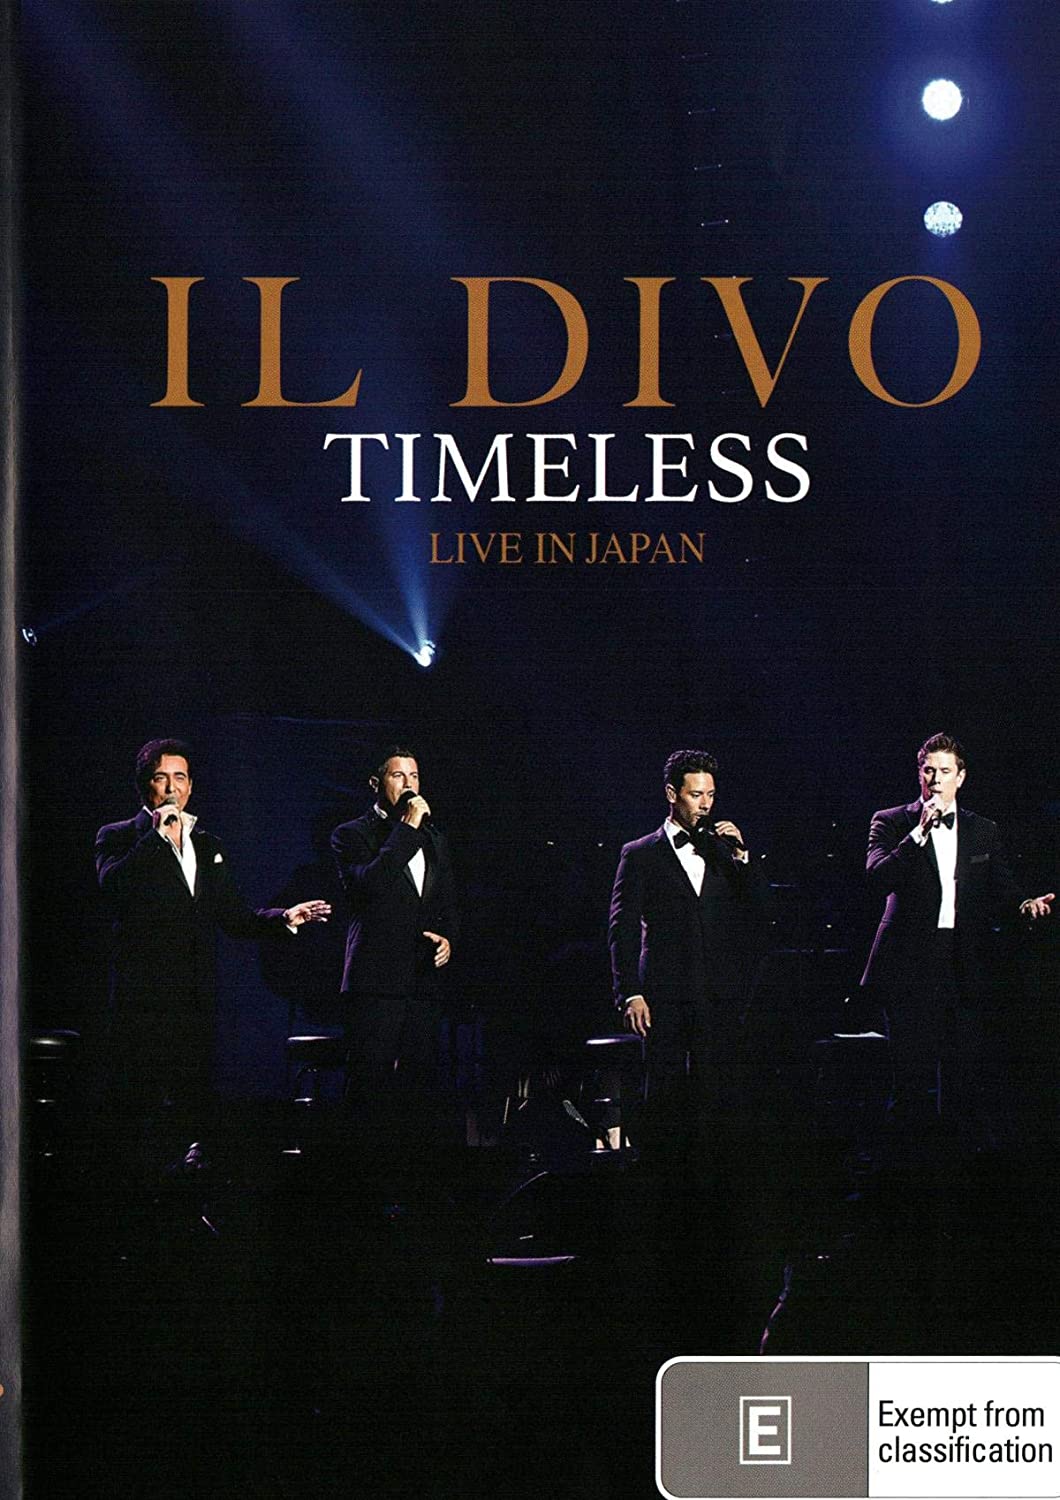 Il Divo - Timeless Tour - Live in Japan (2018) 1080i.BluRay.x264.PCM